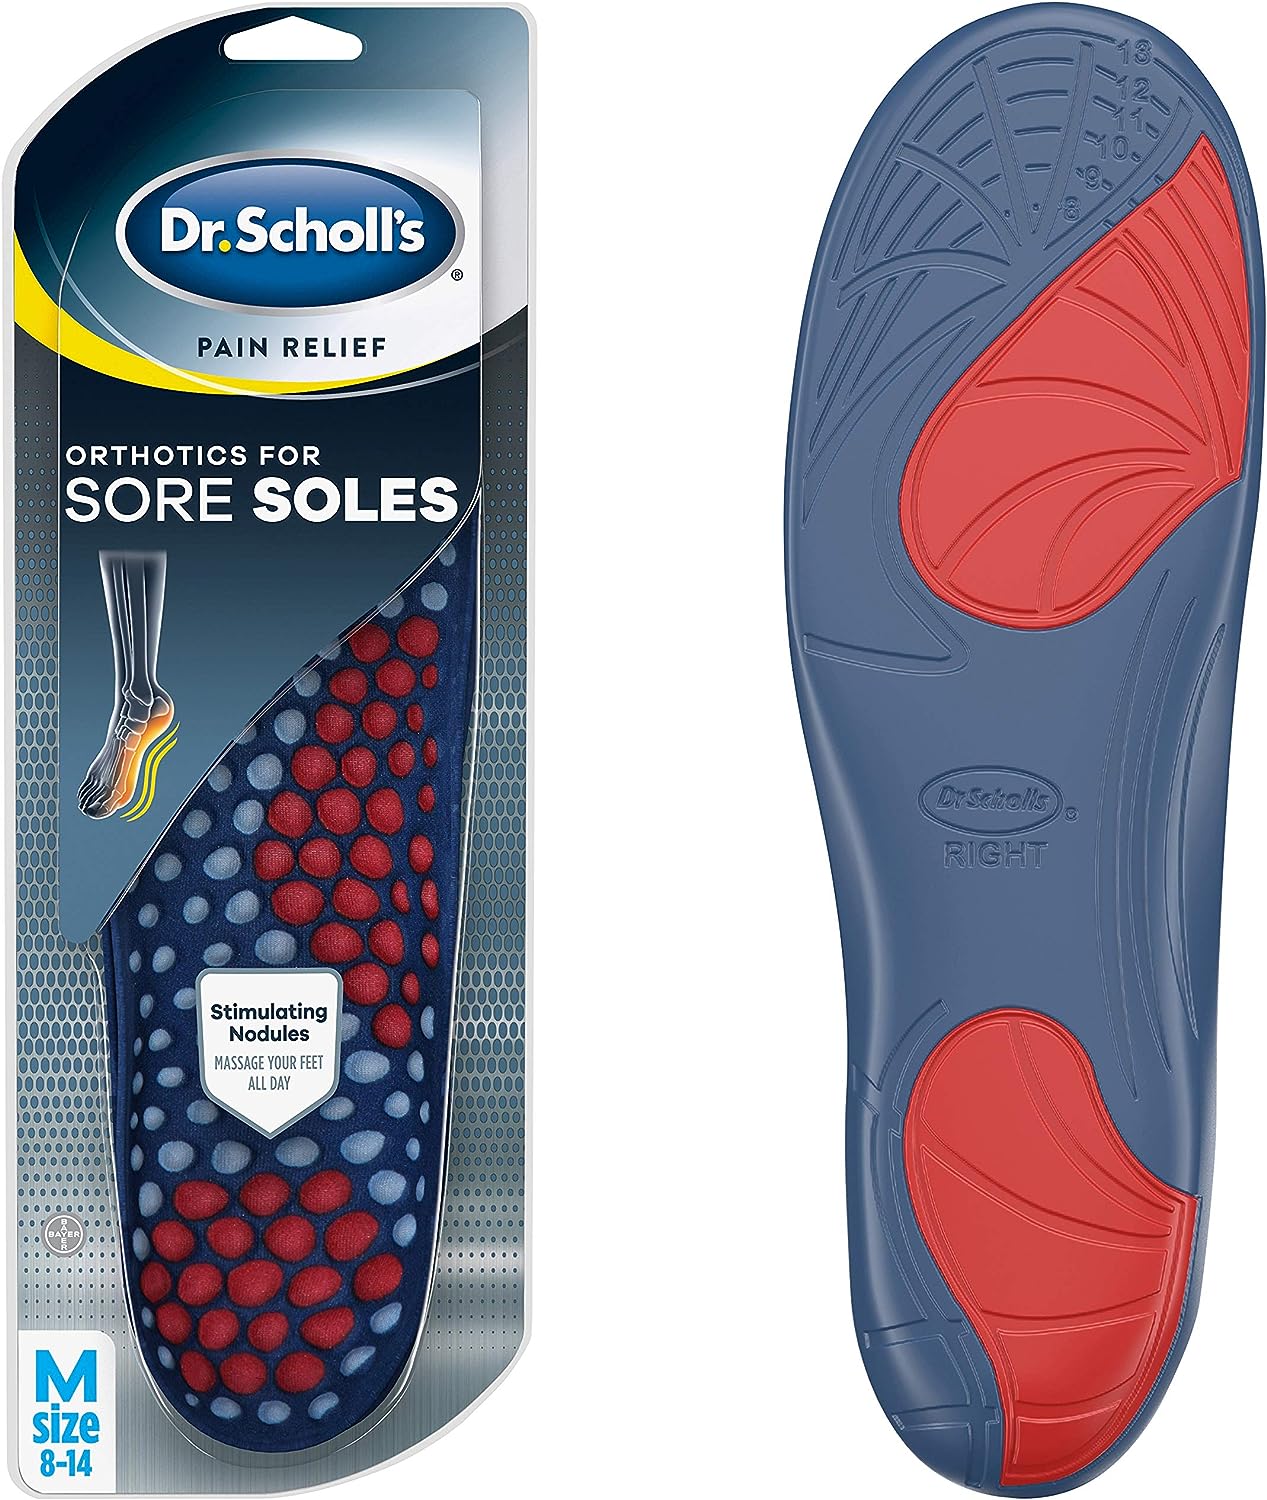 Dr. Scholl's SORE SOLES Pain Relief Orthotics (for [...]